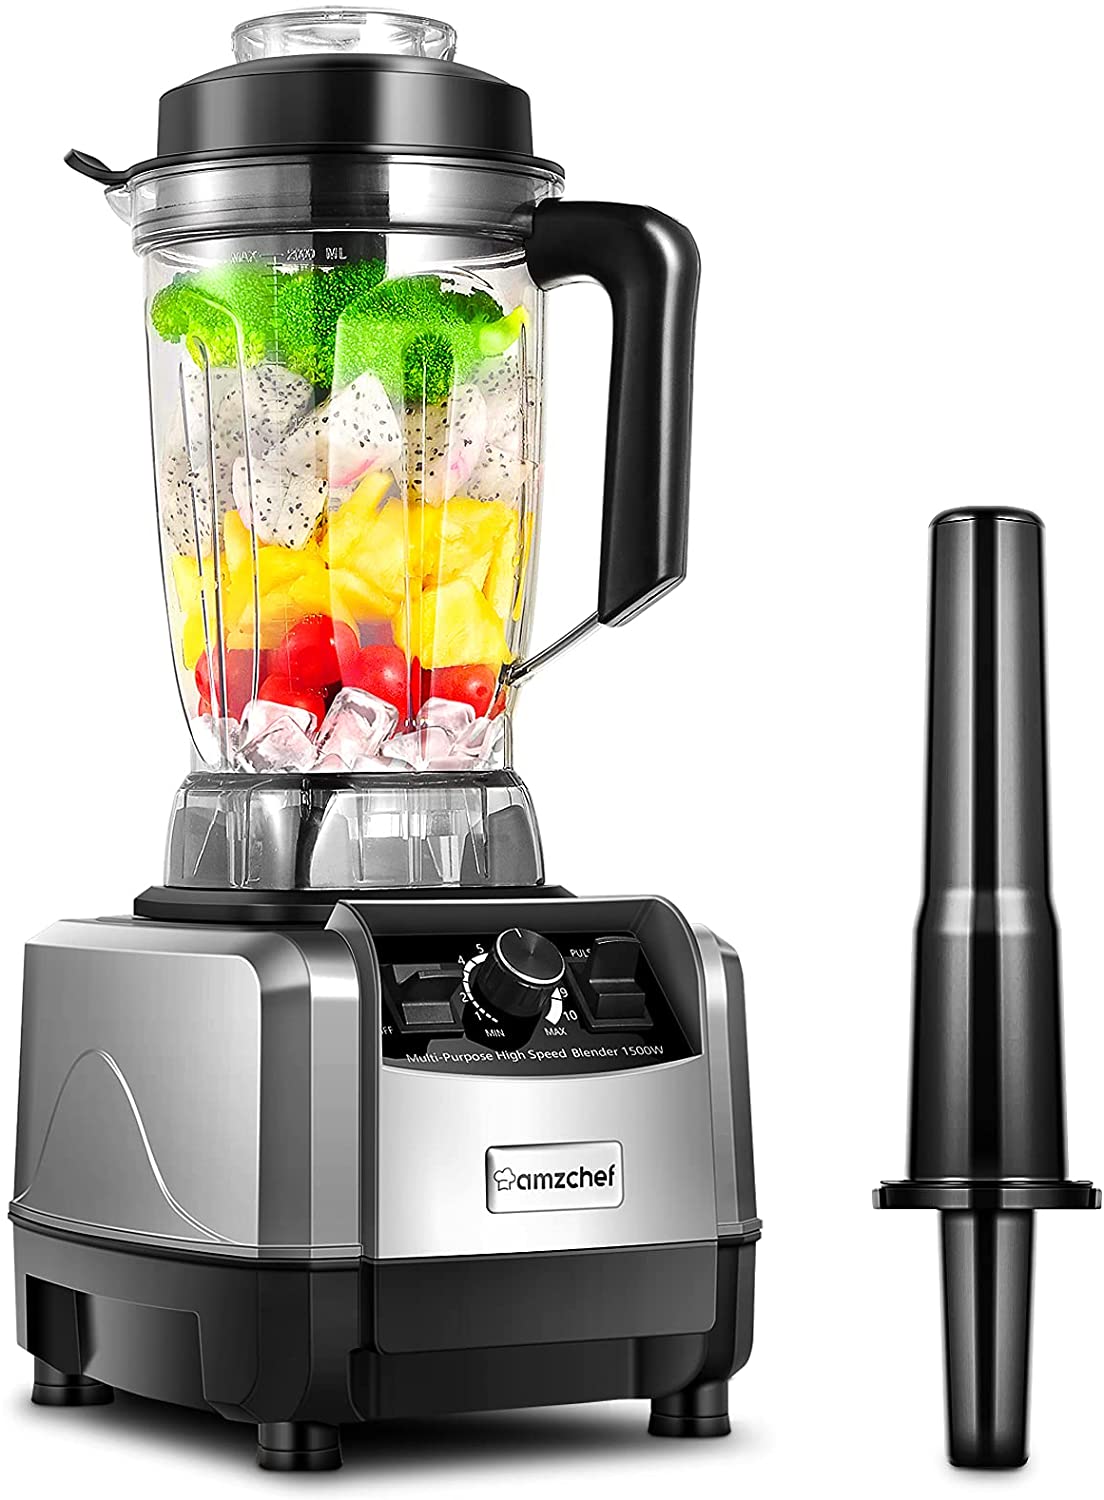 Amzchef Smoothie Blender 2L BPA-Free Container, Impulse / Ice Crush Function [Energy Class A++]